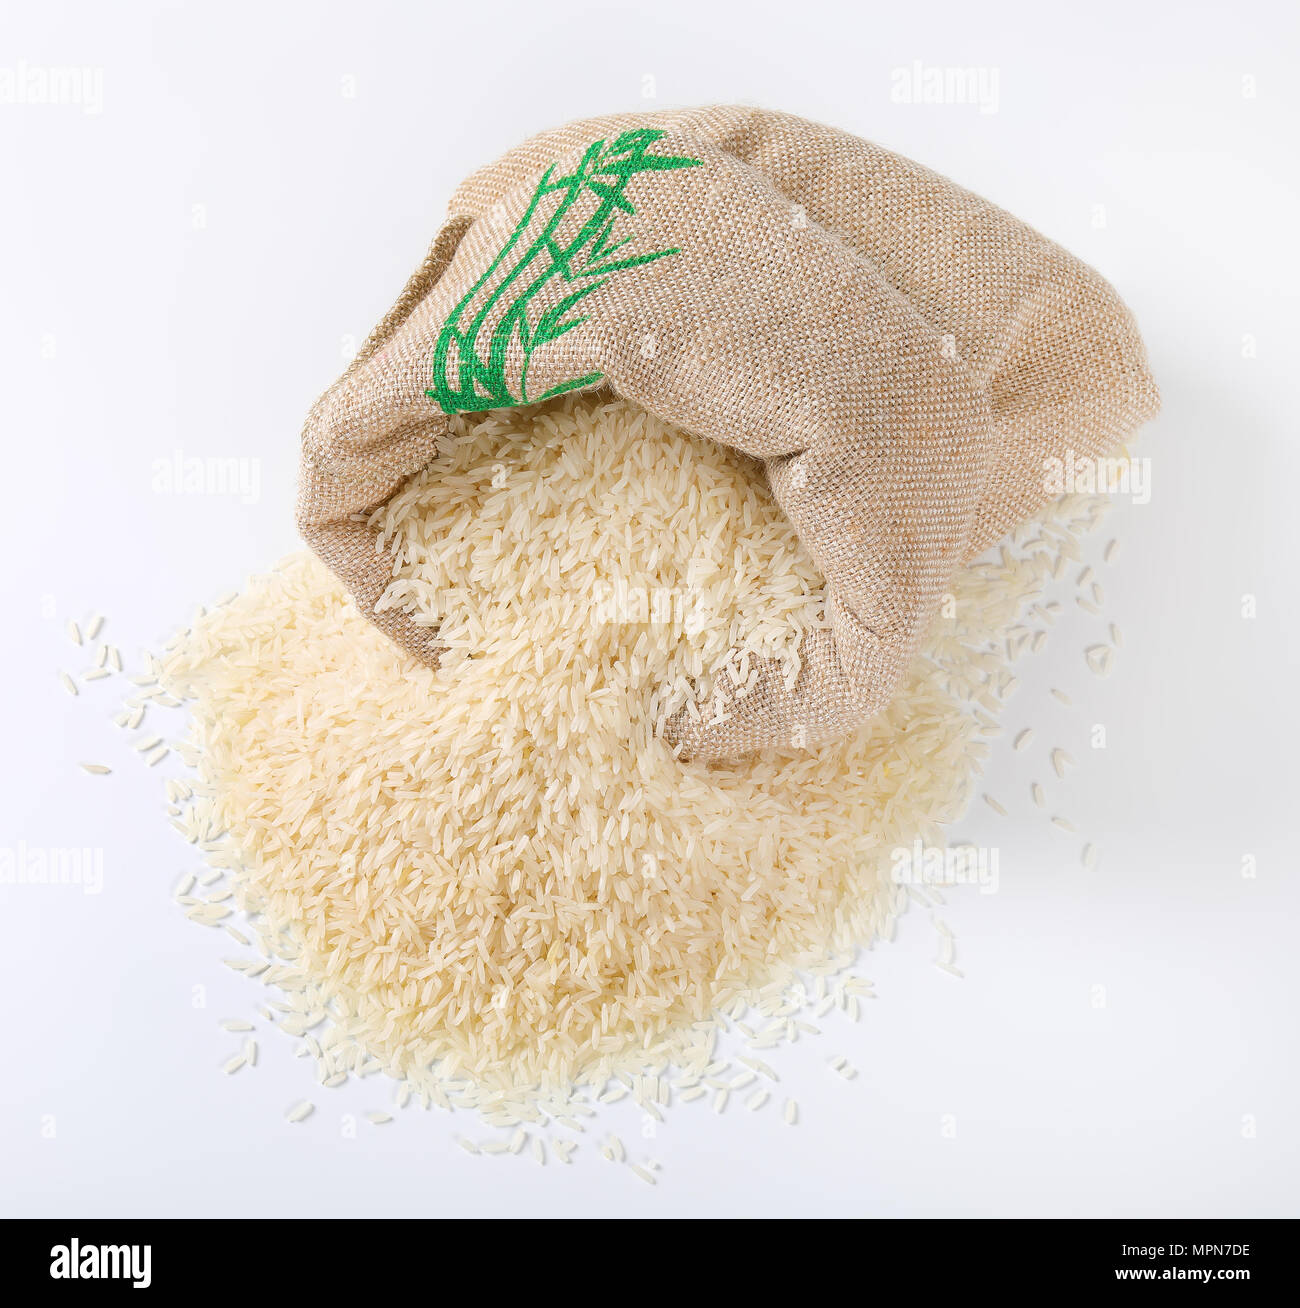 bag and pile of white long grained rice on white background Stock Photo